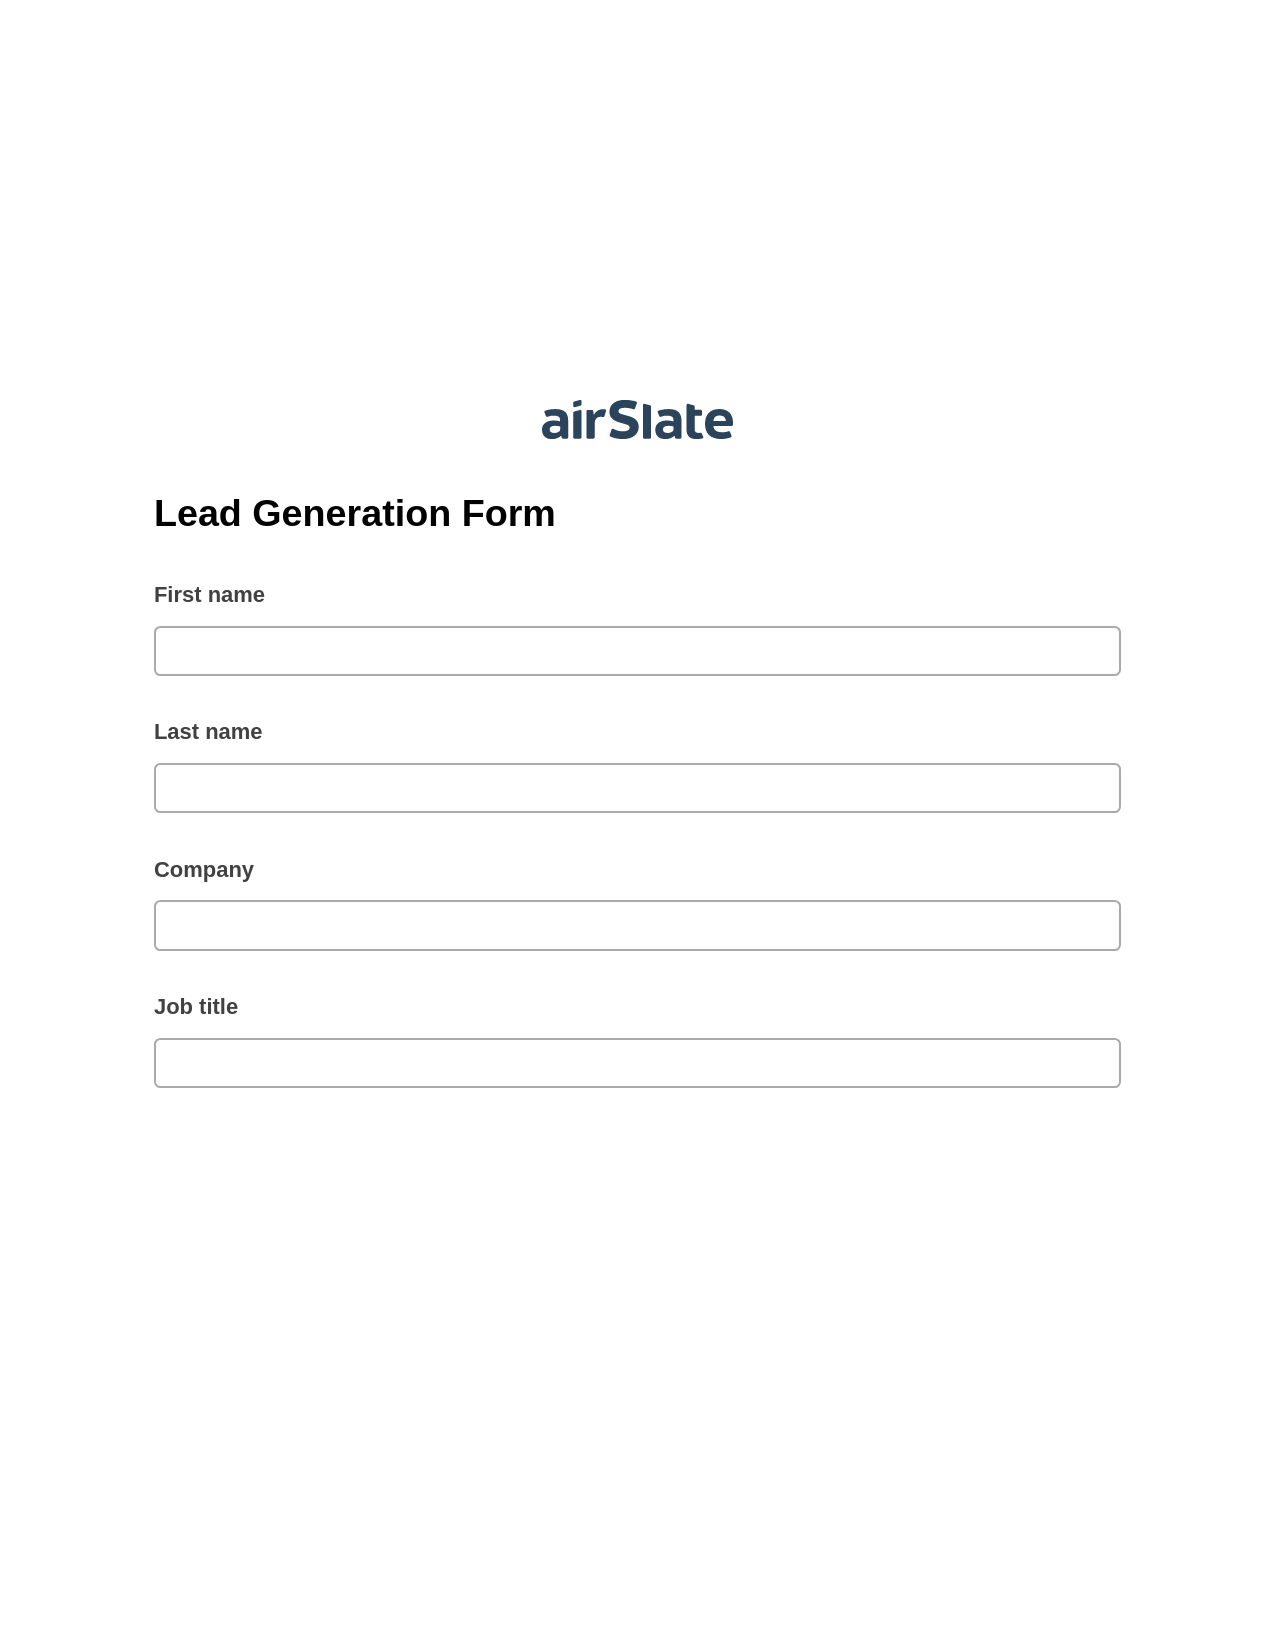 Lead Generation Form Pre-fill from another Slate Bot, Roles Reminder Bot, Export to Smartsheet